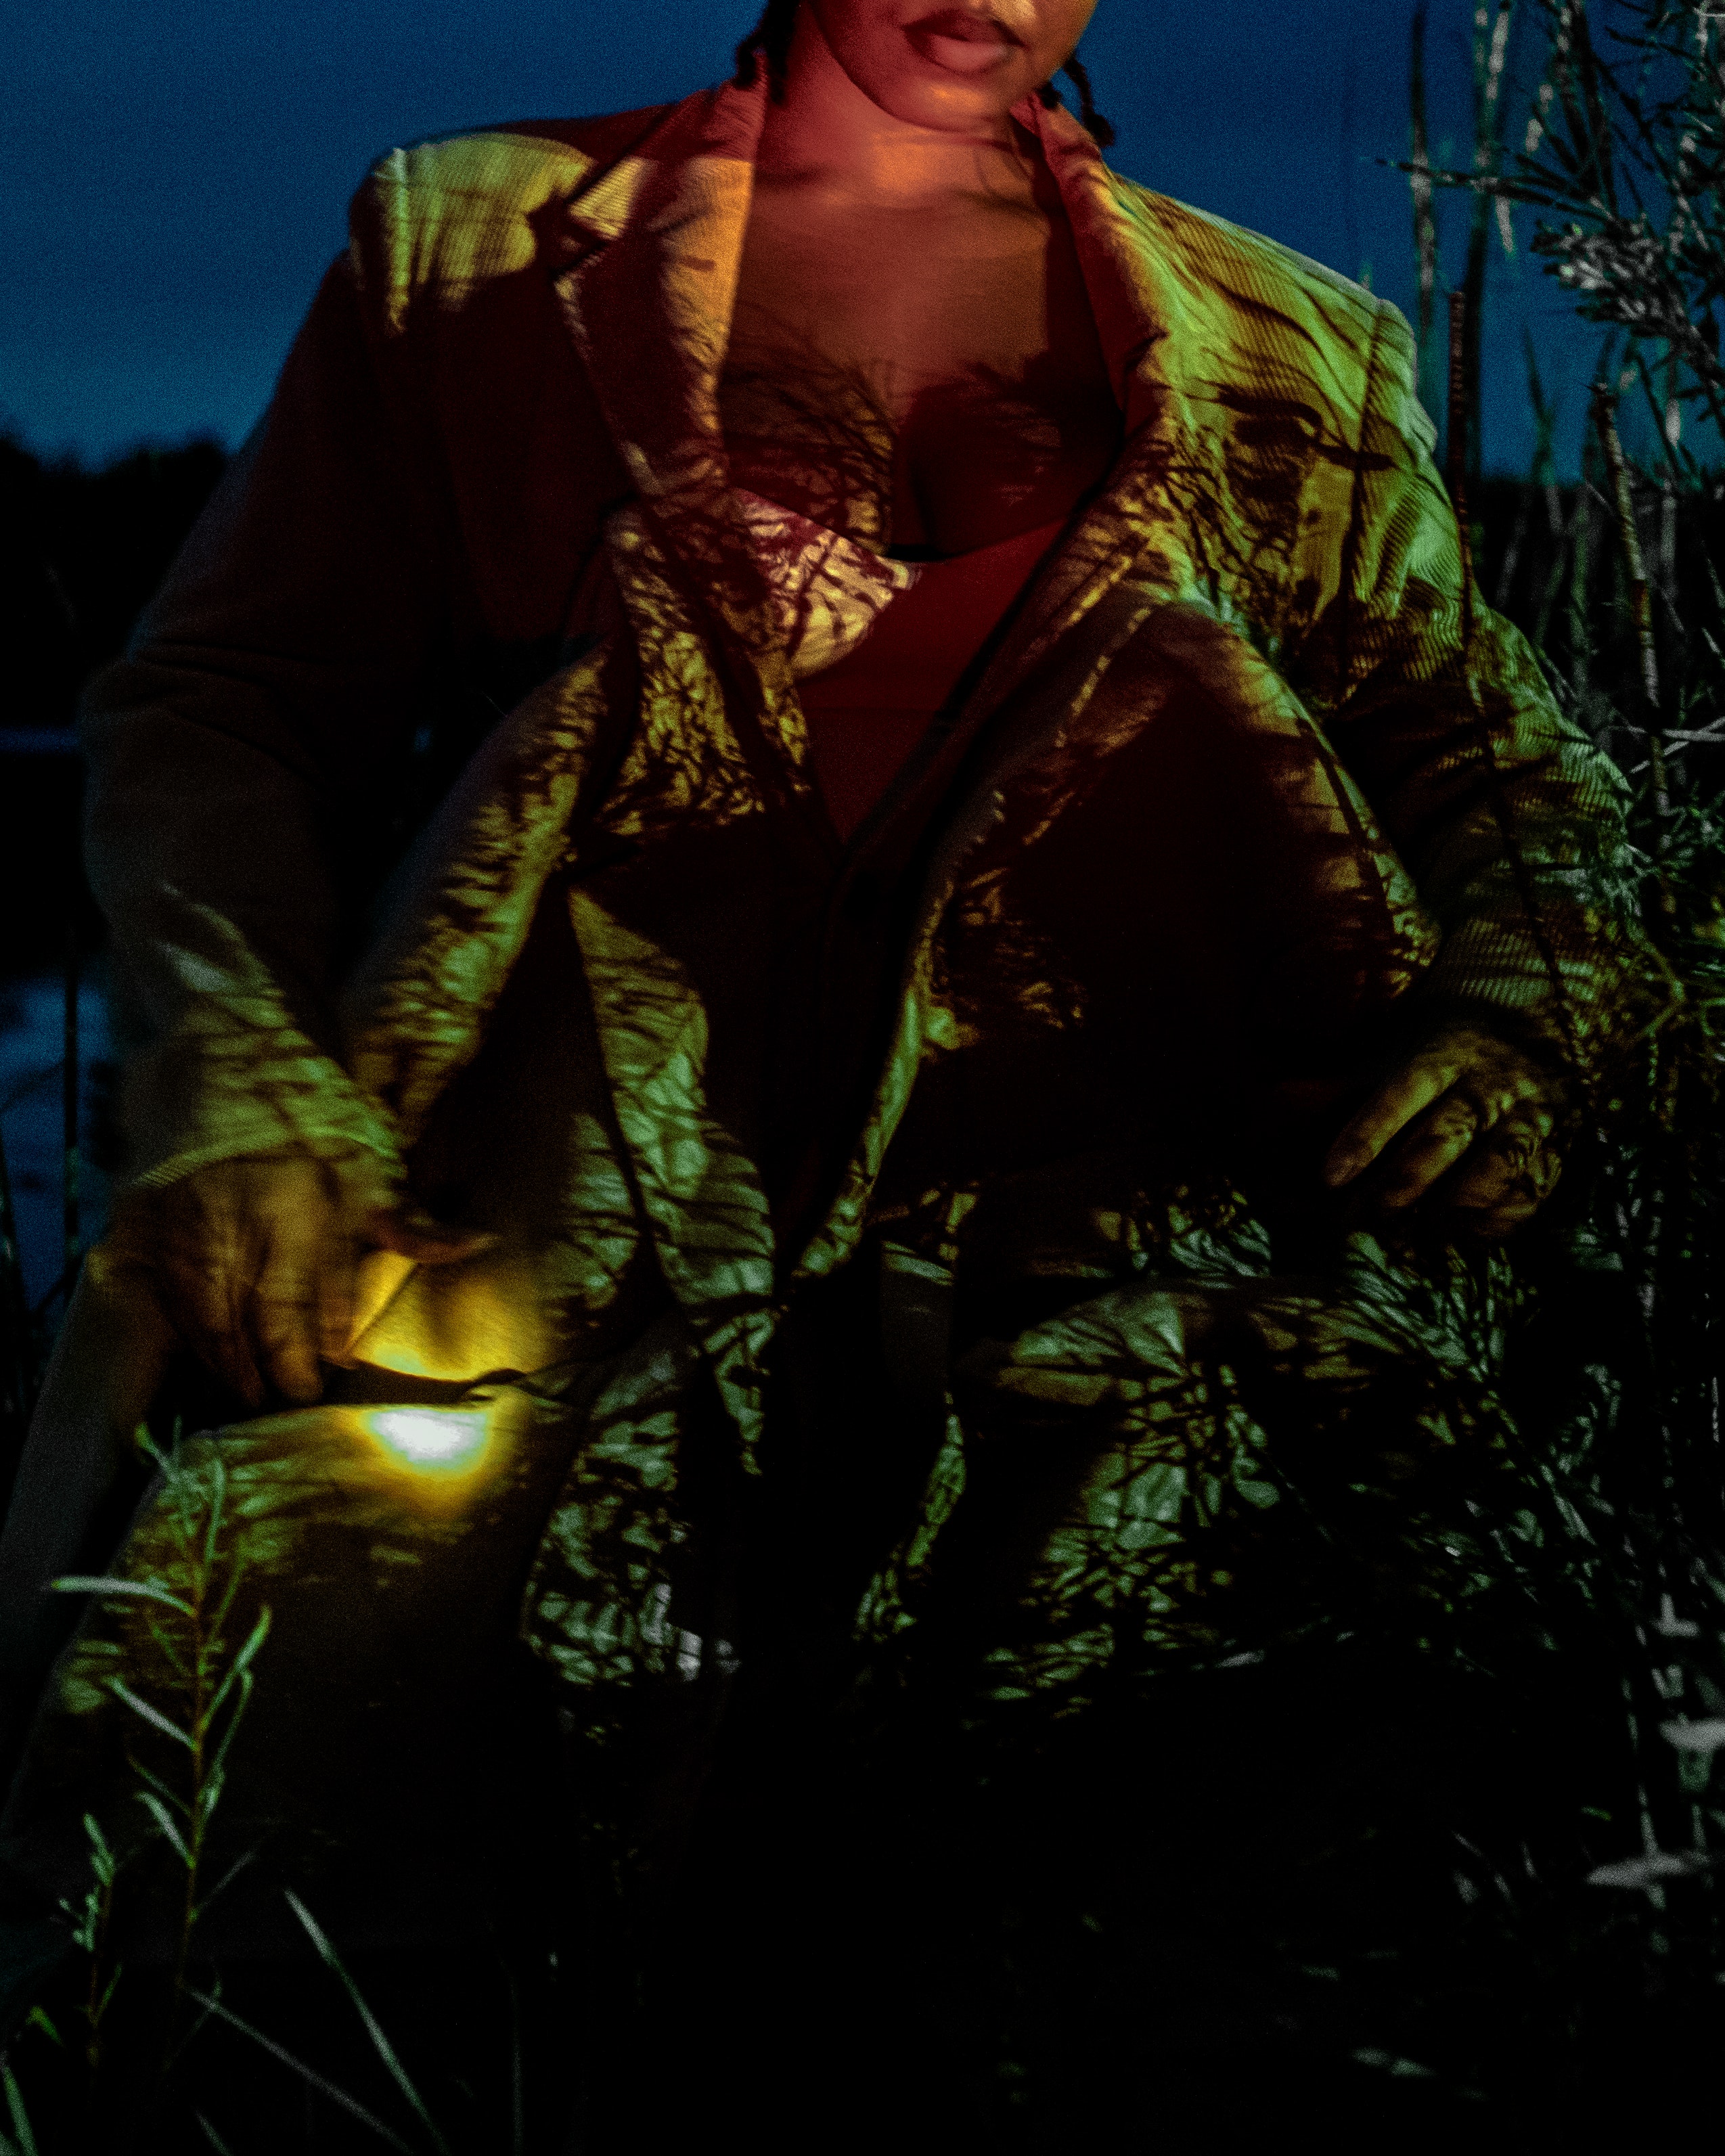 Close up of a person standing in plants near a lakeshore at night.